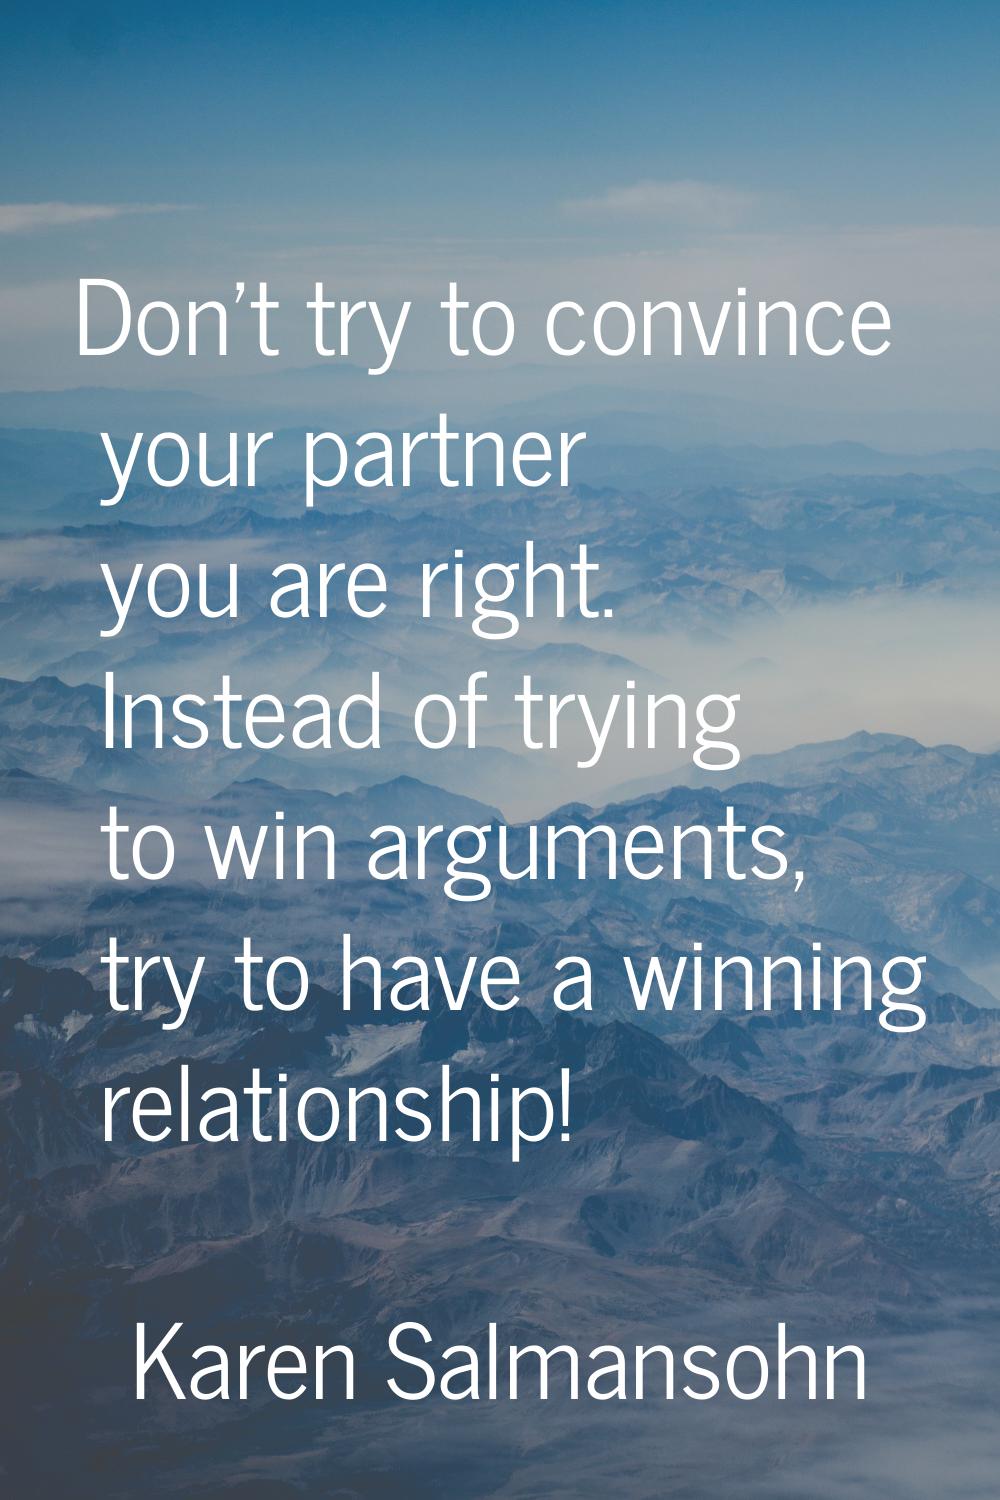 Don't try to convince your partner you are right. Instead of trying to win arguments, try to have a